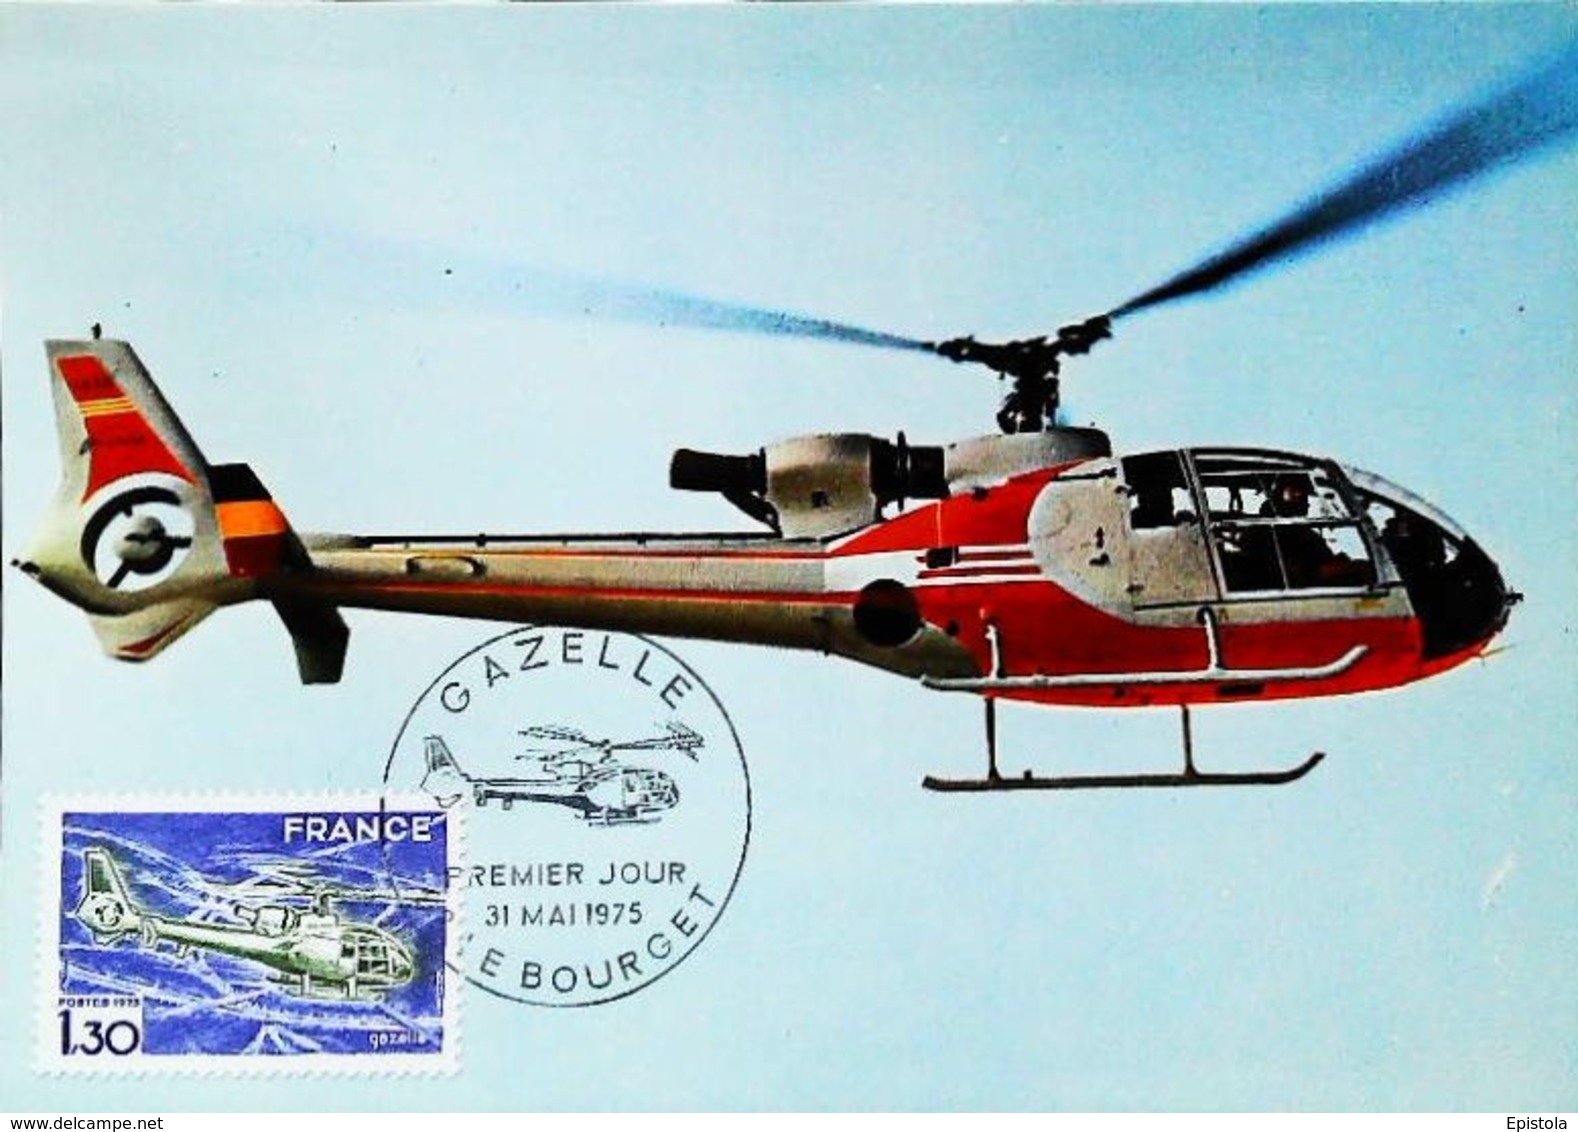 HELICOPTERE " Gazelle" - Carte Maximum Card 1975 (Le Bourget) - Helicopters